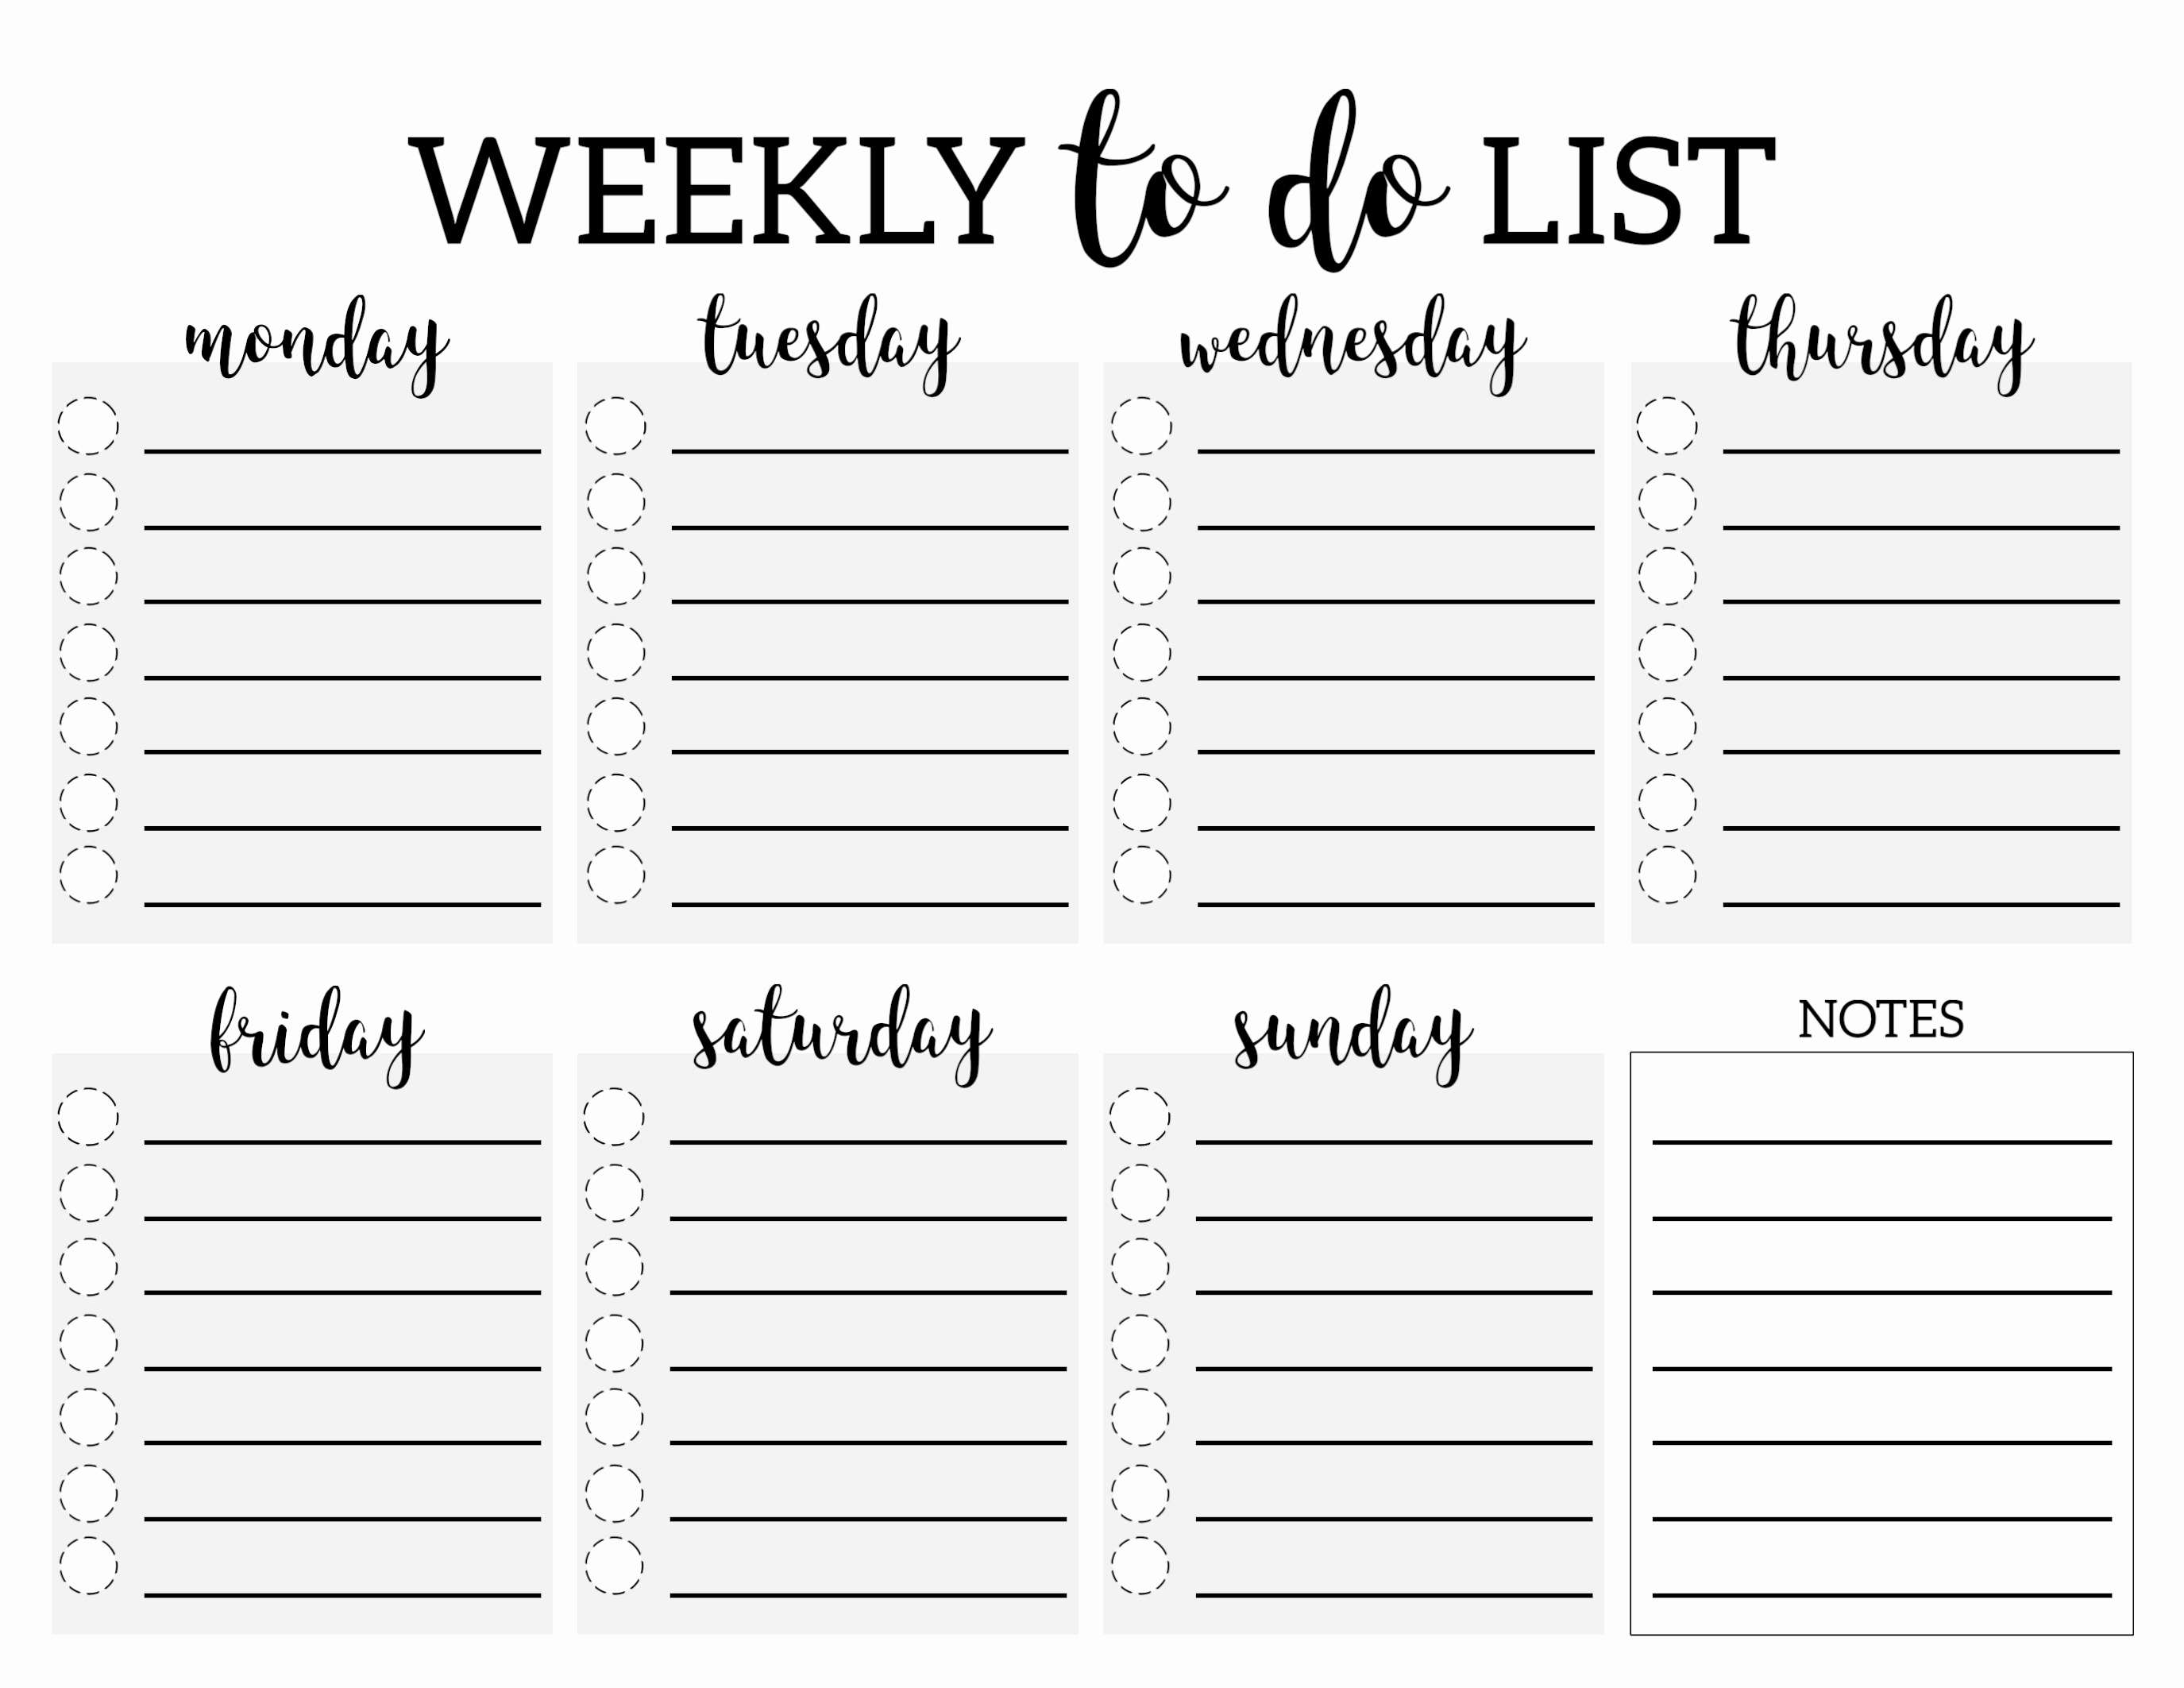 Weekly todo List Template Awesome Weekly to Do List Printable Checklist Template Paper